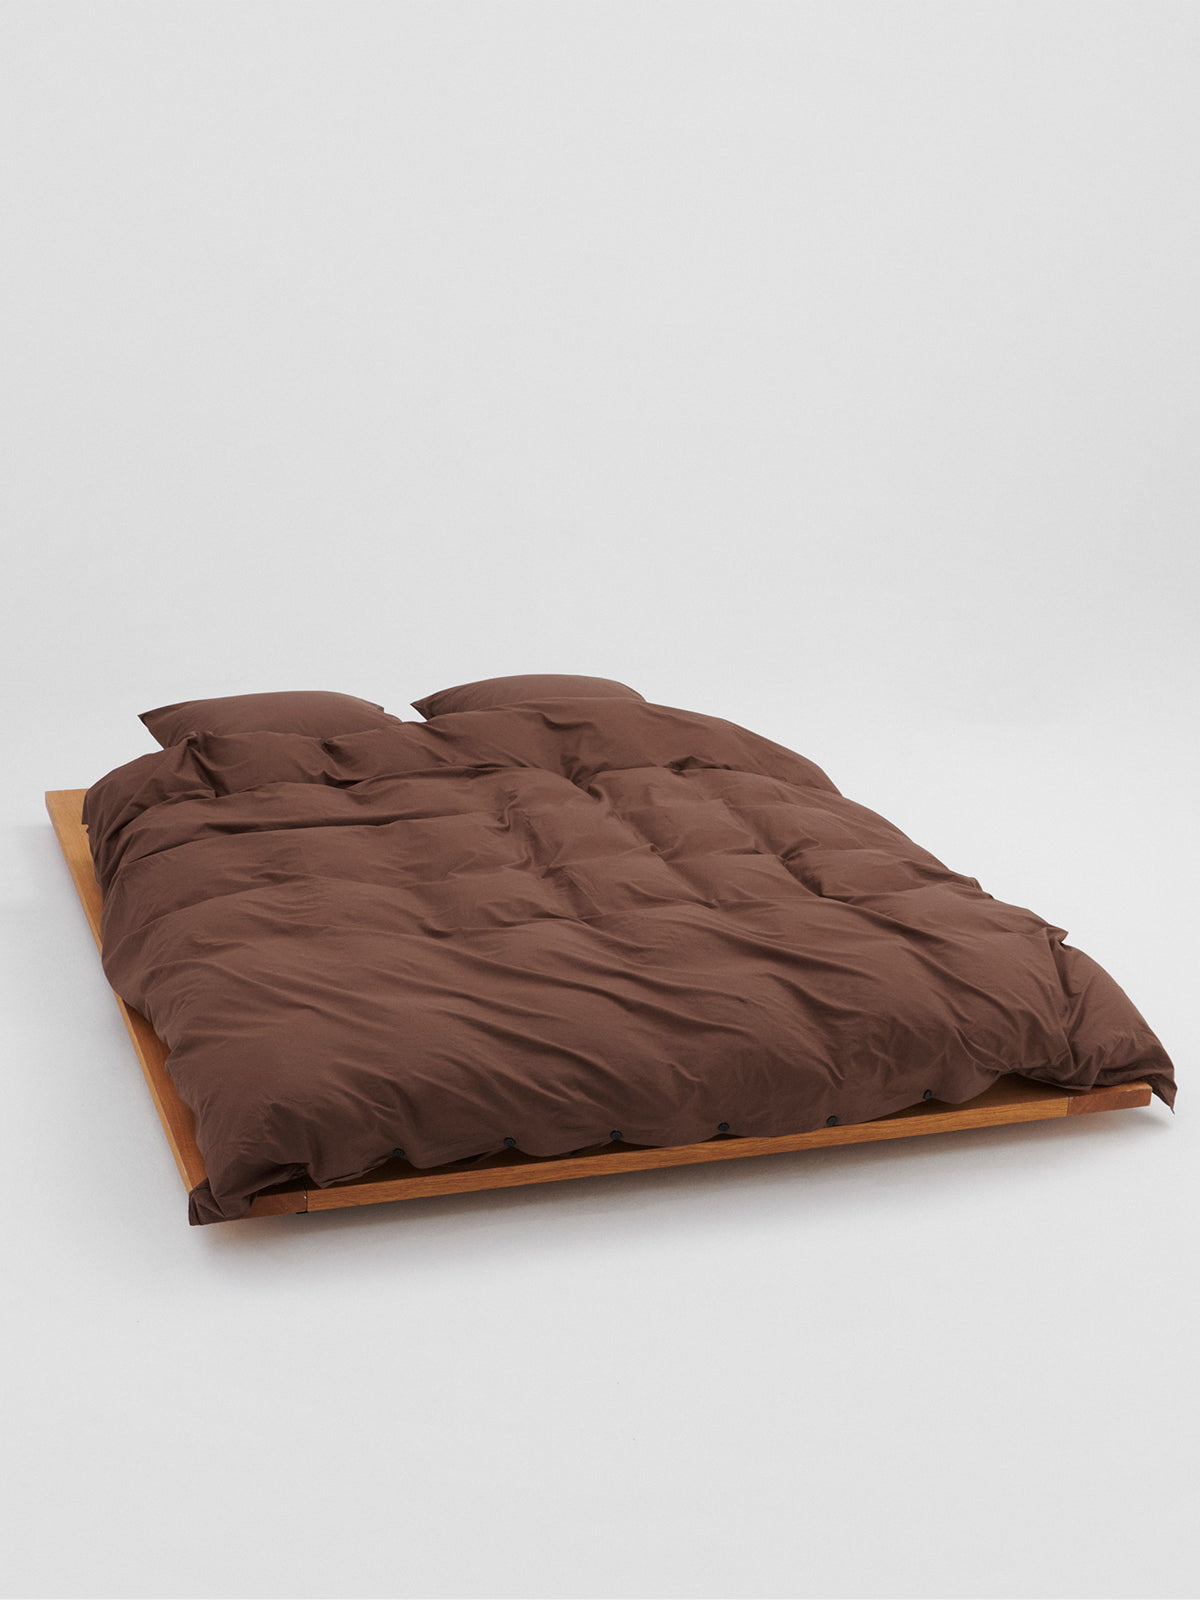 Tekla - Percale Duvet Cover in Cocoa Brown